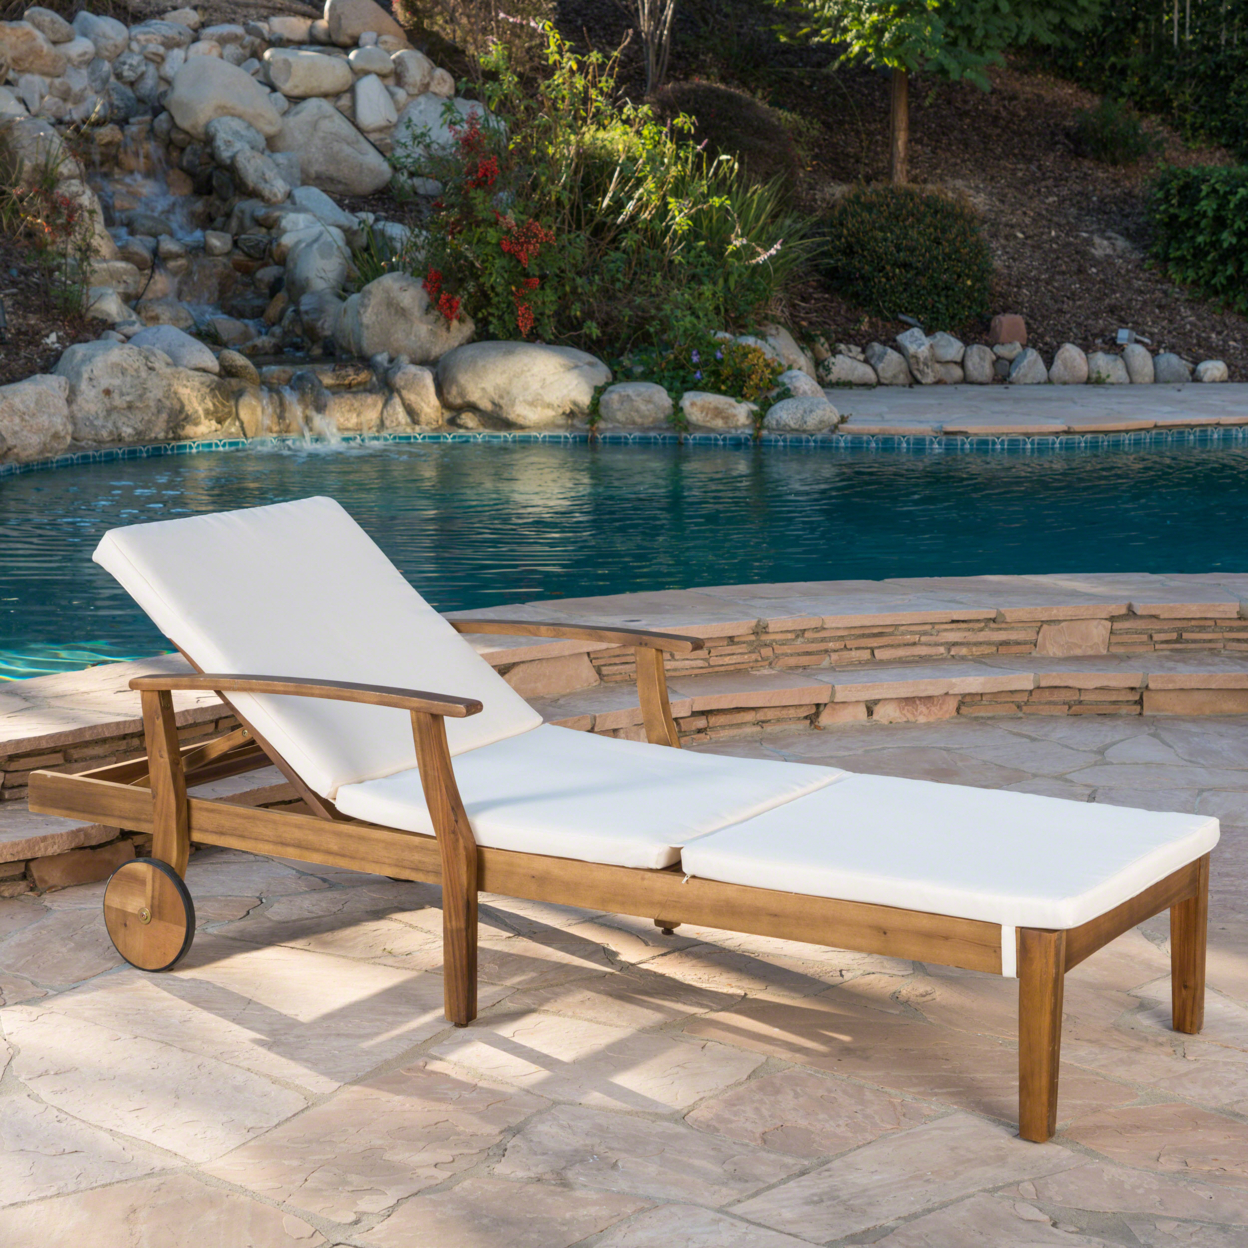 Daisy Outdoor Teak Finish Chaise Lounge With Water Resistant Cushion - Cream, Set Of 2